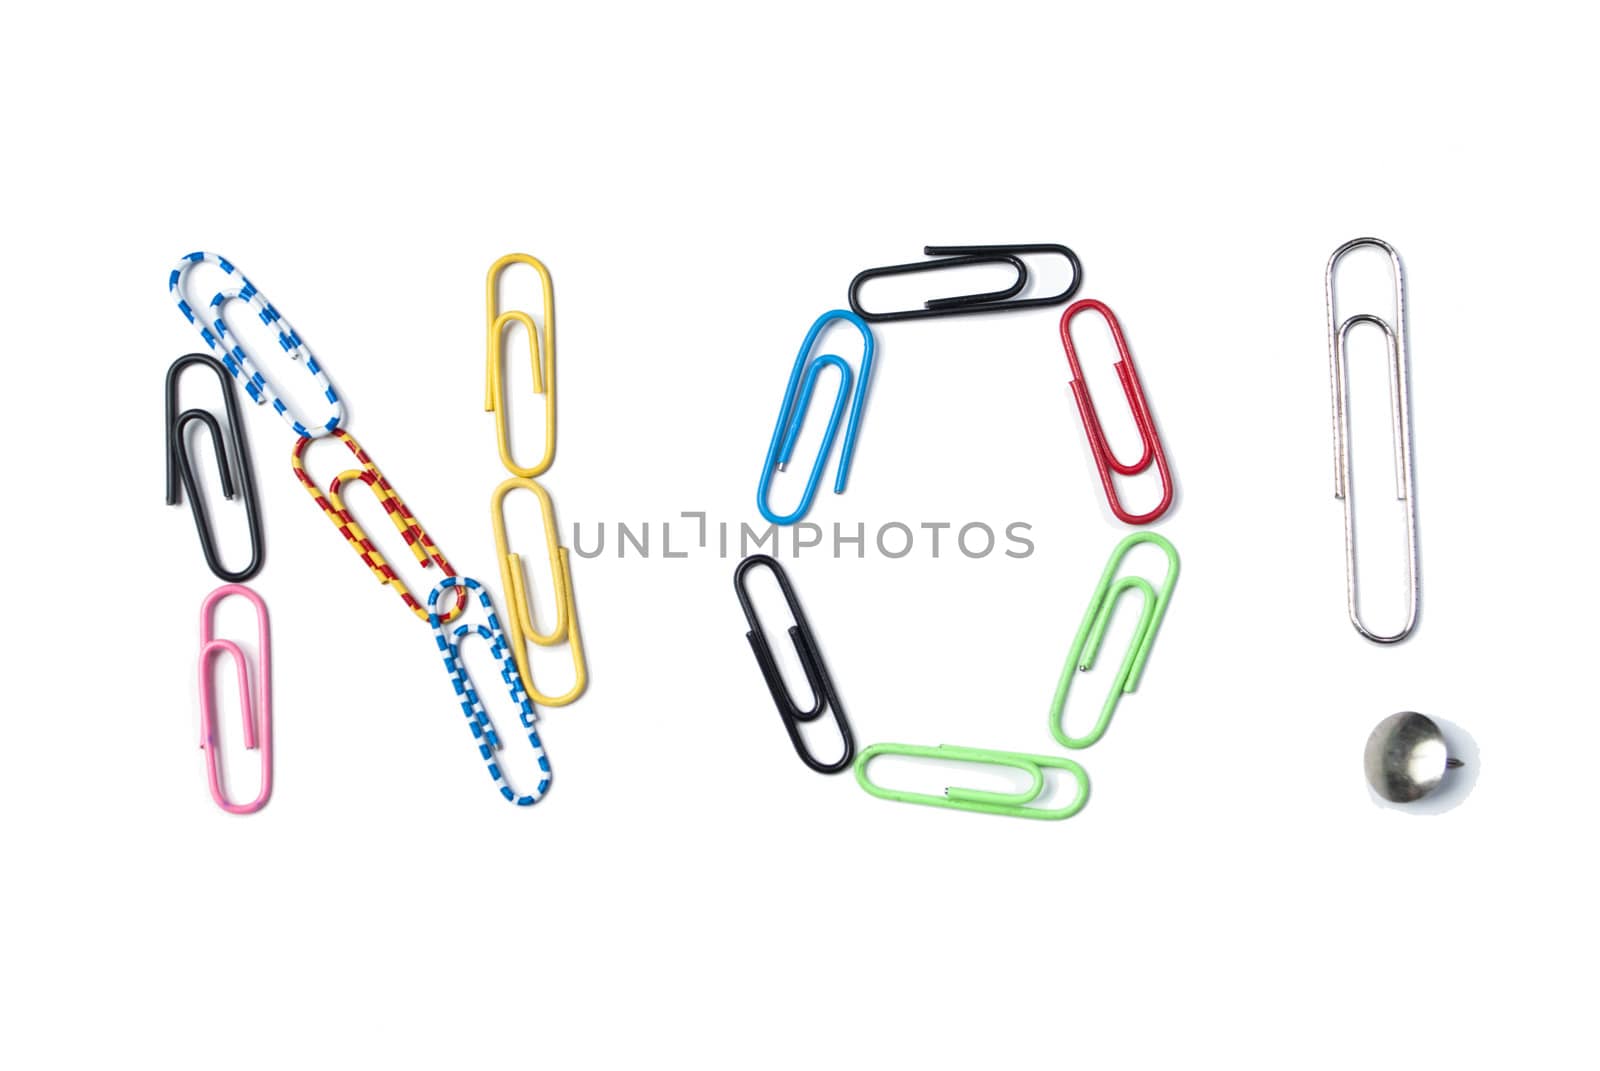 Word "No!" from paper clips